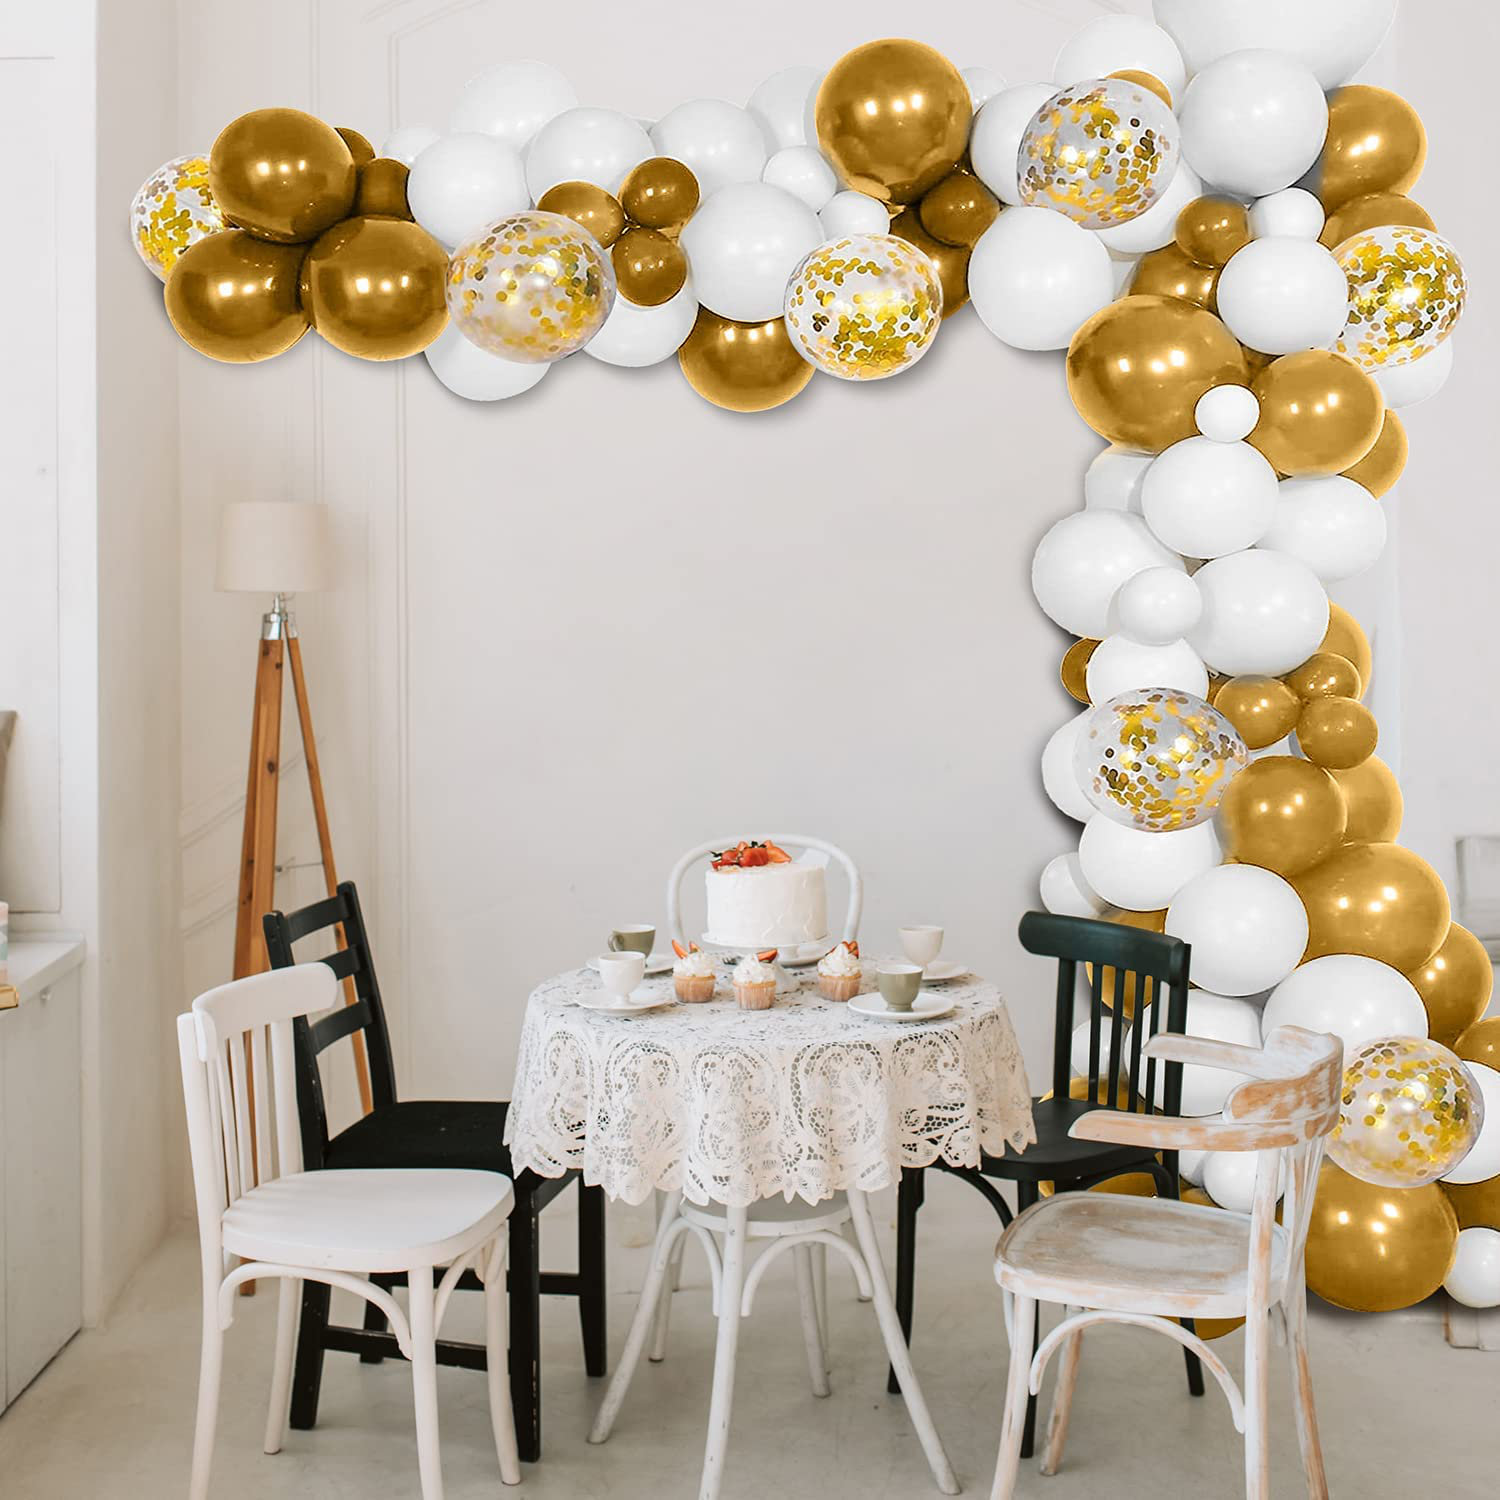 decorating with balloons